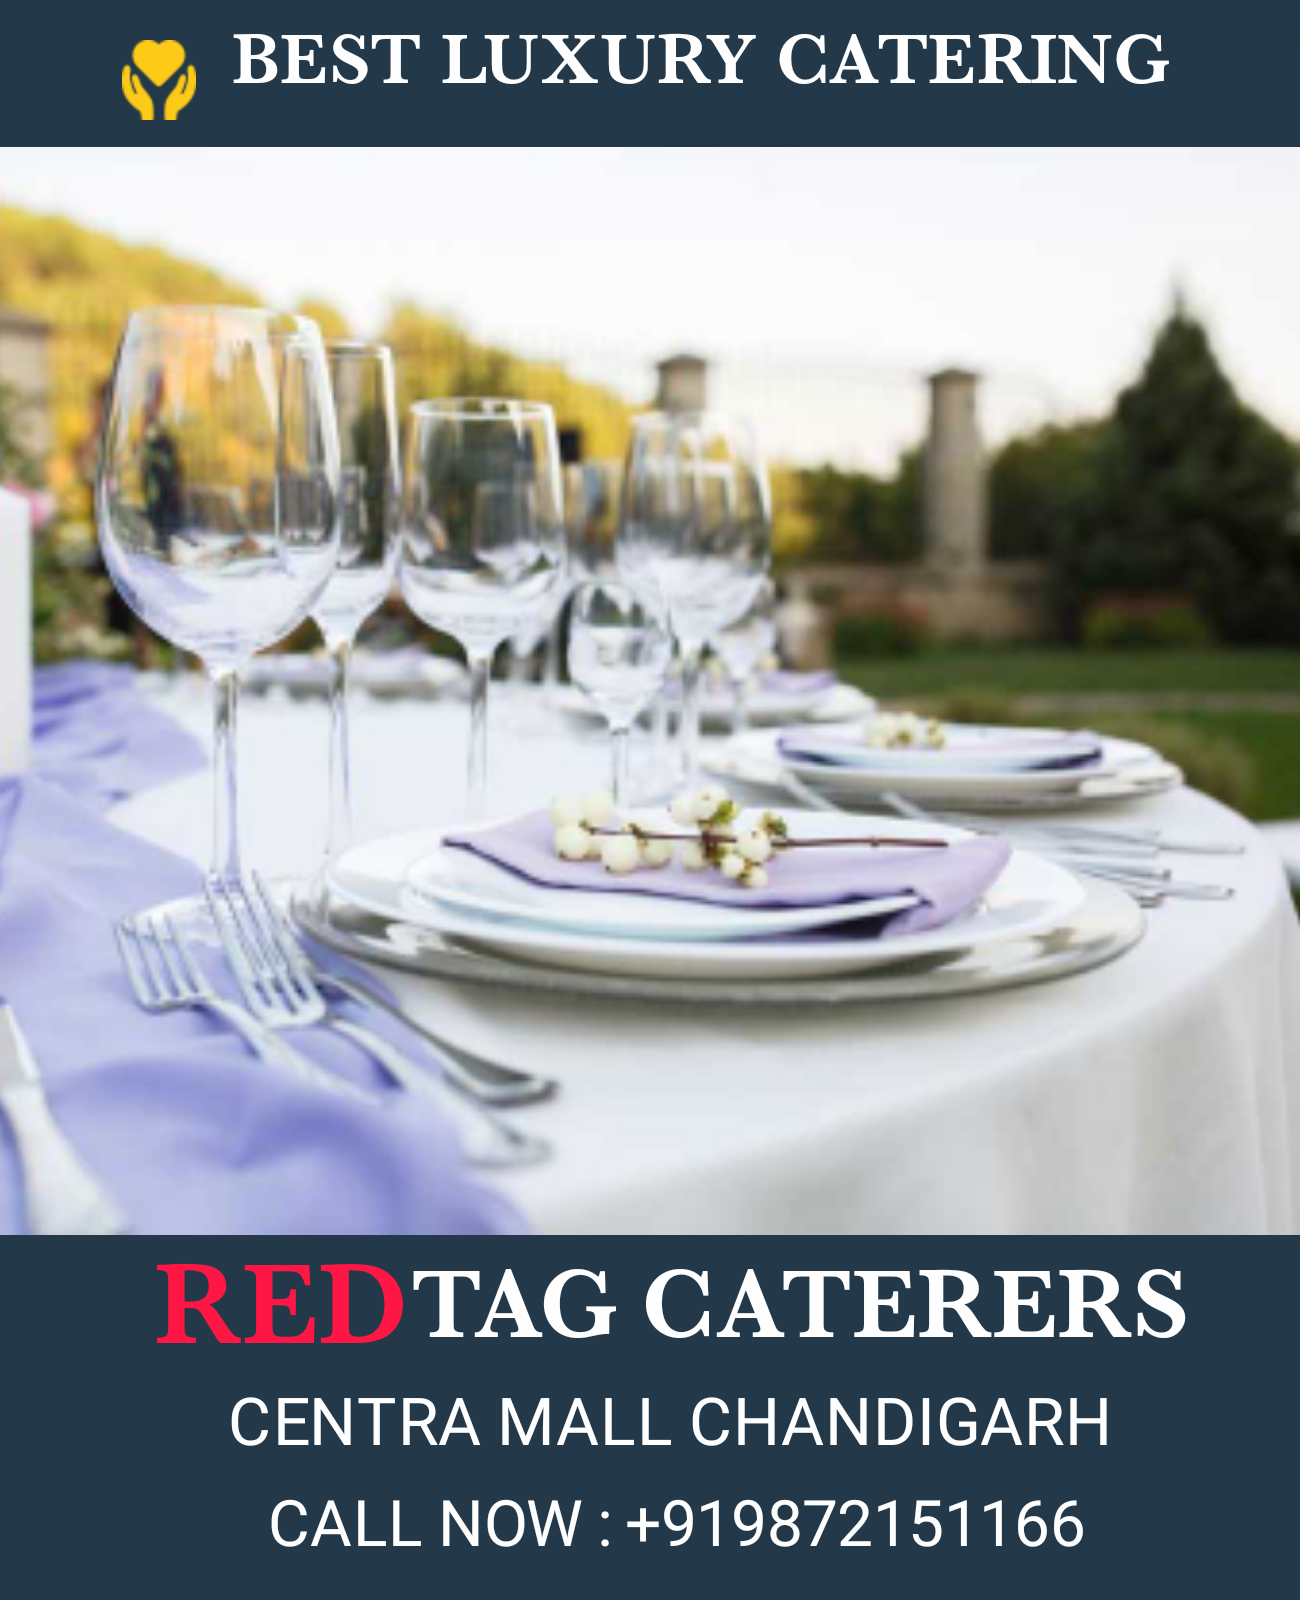 BEST CATERERS IN MANAGEMENT ZIRAKPUR | Red Tag Caterers | best catering service in zirakpur, best hygienic catering service in zirkpur, best luxury catering service in zirakpur , - GL46649